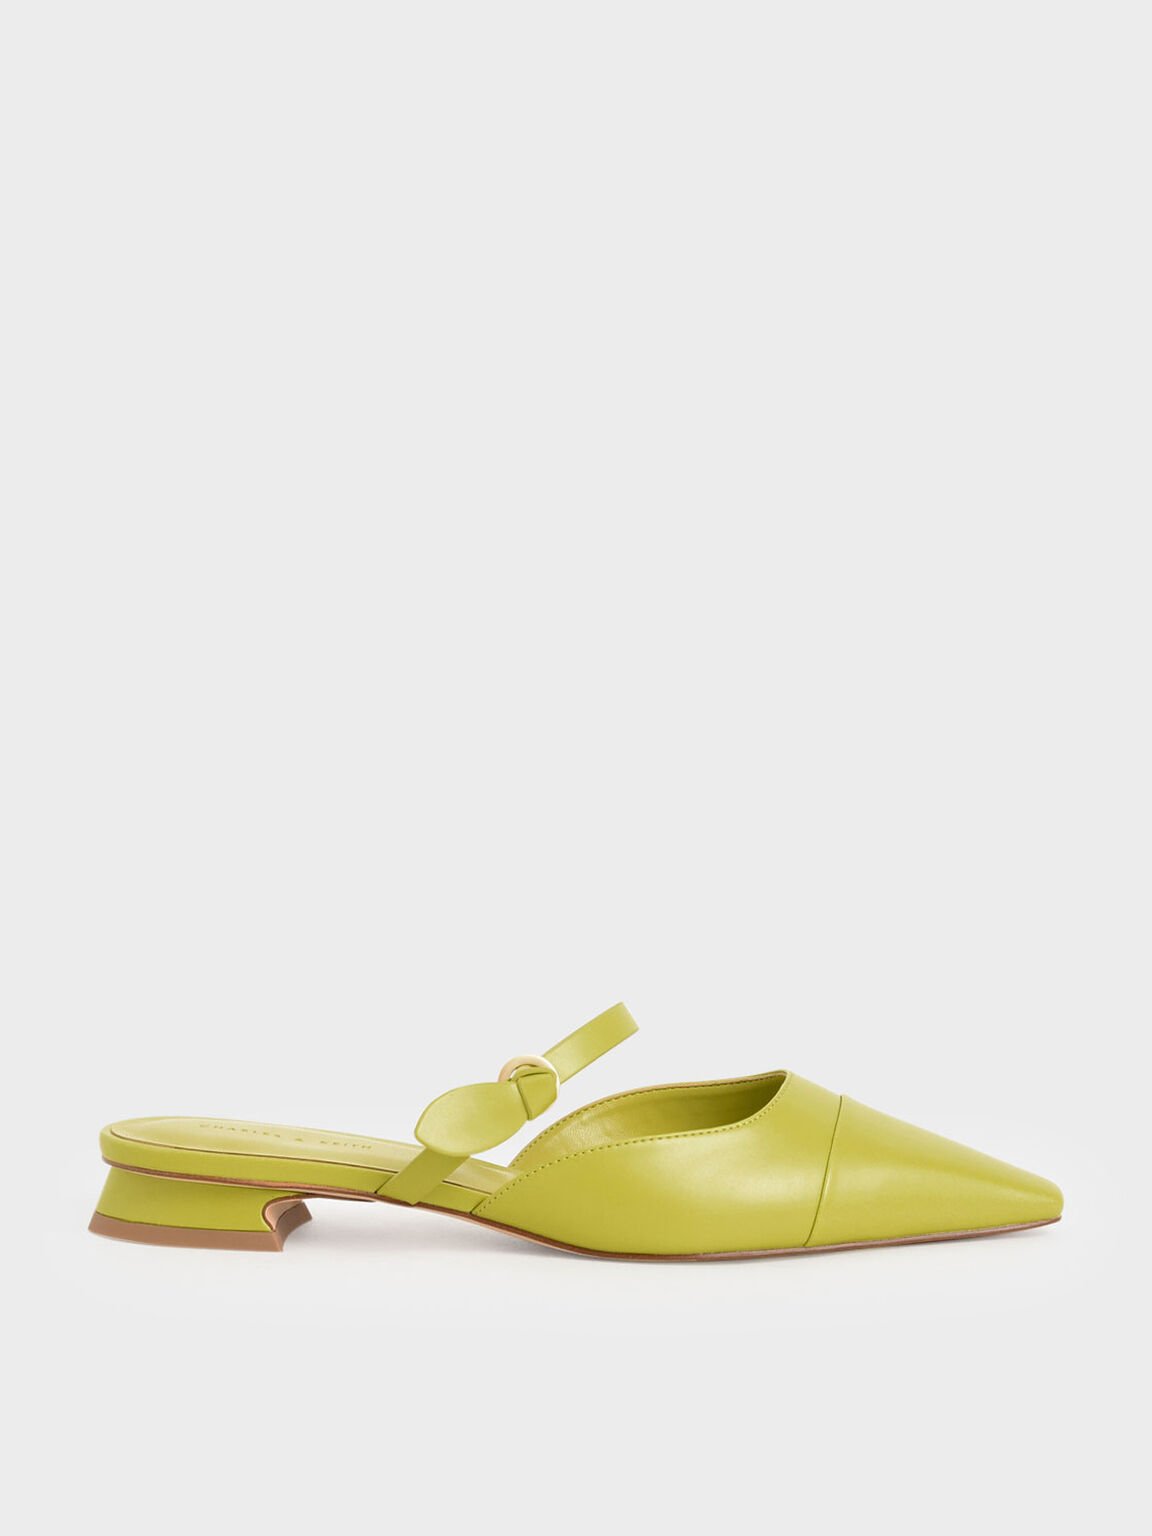 Mary Jane Strap Flat Mules, Green, hi-res